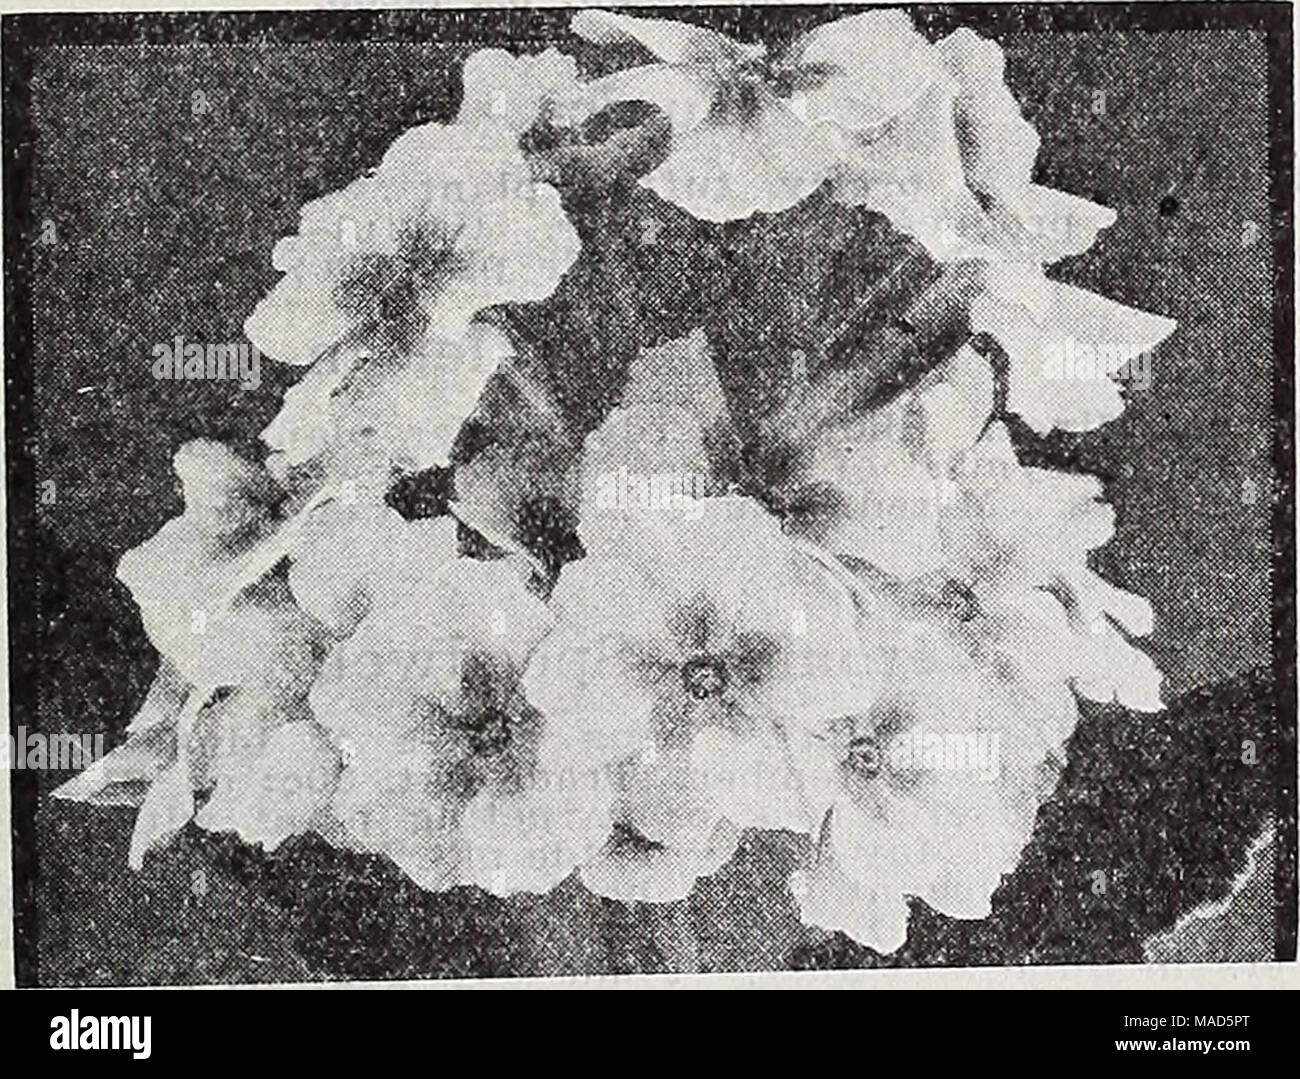 . Dreer's wholesale catalog for florists : winter spring summer 1937 . Primula polyanthus. Invincible Giant Perennial Primulas—Hardy Primrose Tr. pkt. Auricula. Choice mixed. % oz. $•&lt; .50. $0 50 Polyanthus Invincible Giant. A grand Oz. strain of strong vigorous habit. Large flowers of wonderful colormg.. Giant Munstead Strain, Extra-large flowers in white and yellow Enfflisli Mixed. A very good grade saved from a fine strain containing all colors Japonlca (Japanese Primrose). Bright flowers borne In whorls on Btems to 9 inches long; mixed colors Vulffaris (English Primrose). Canary yellow, Stock Photo